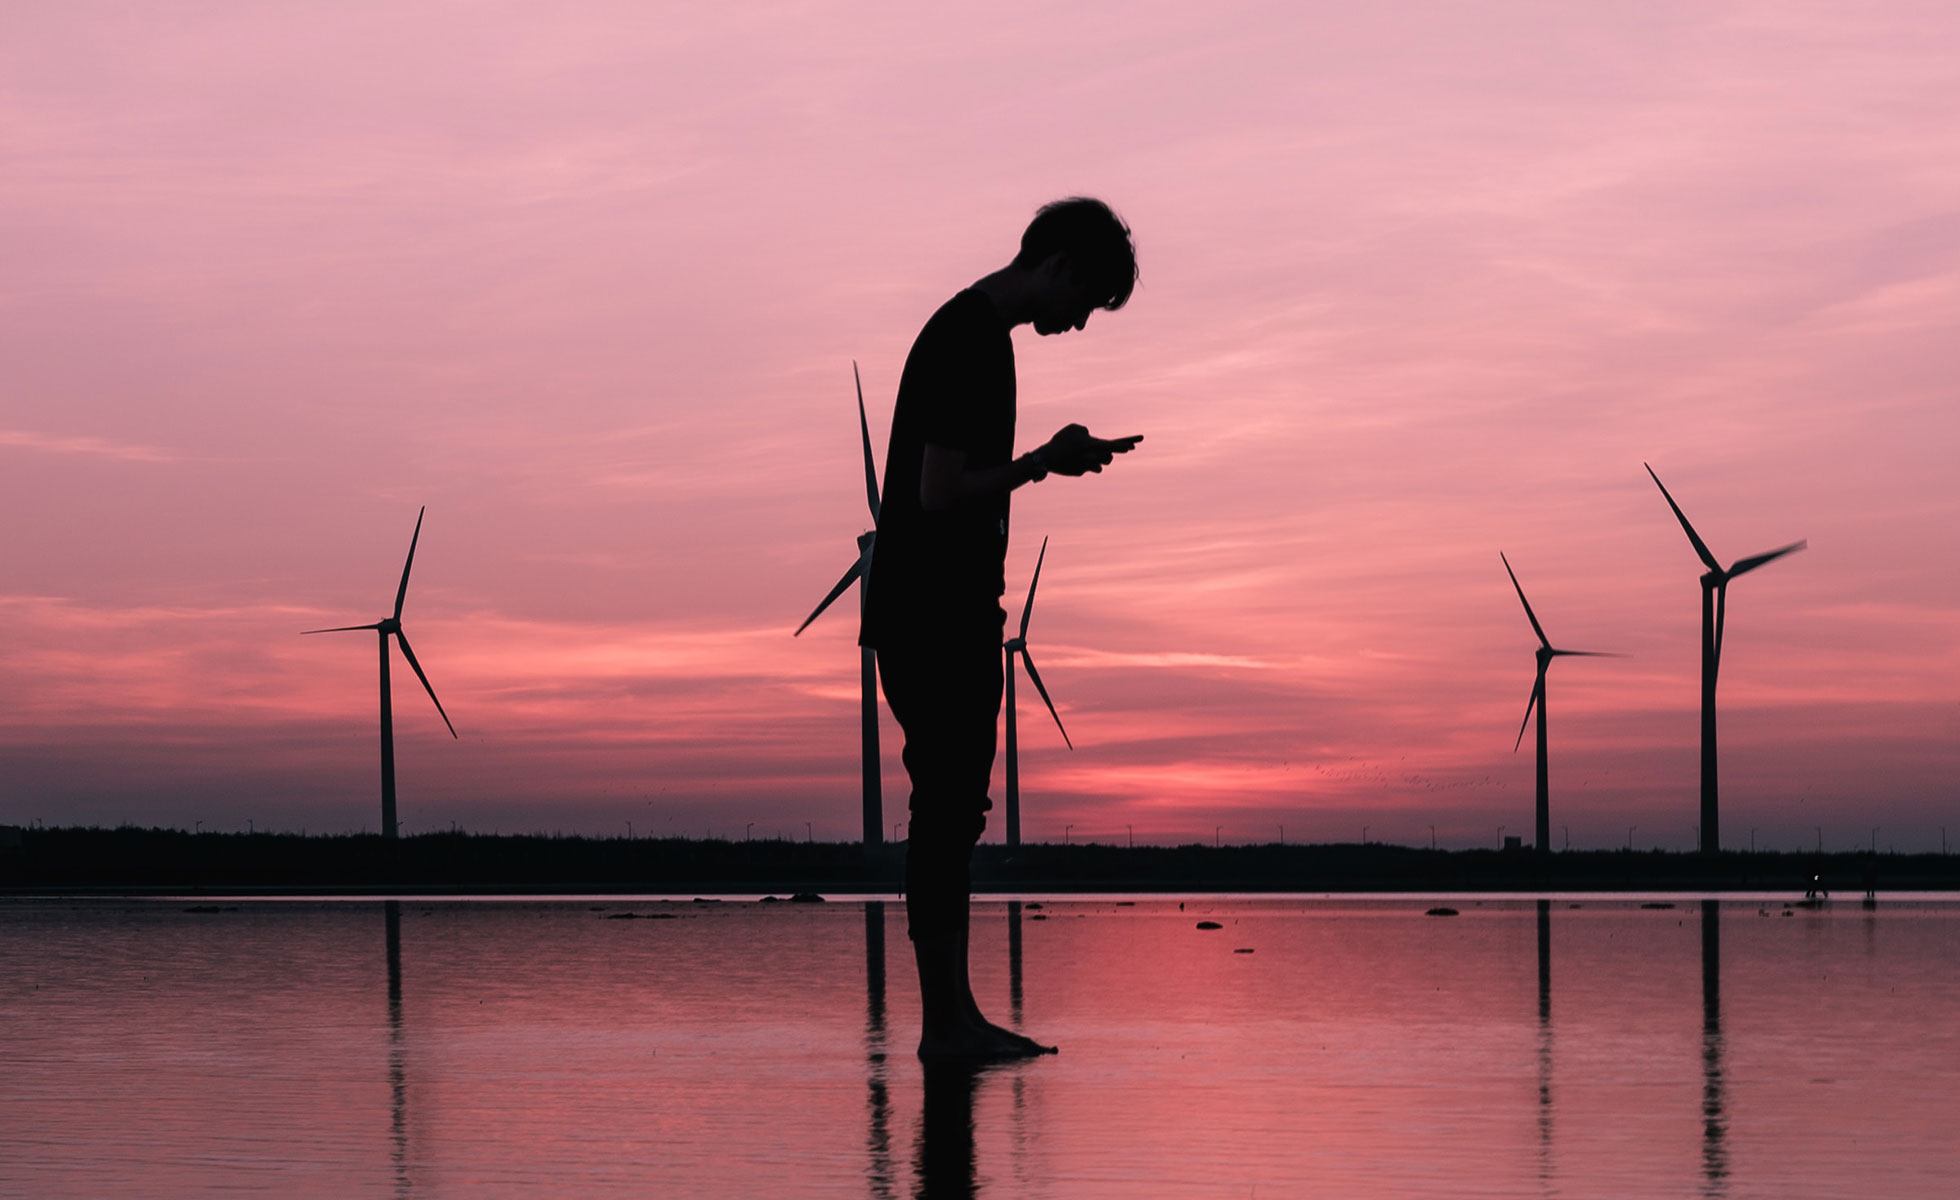 Young person reading online in front of wind turbines